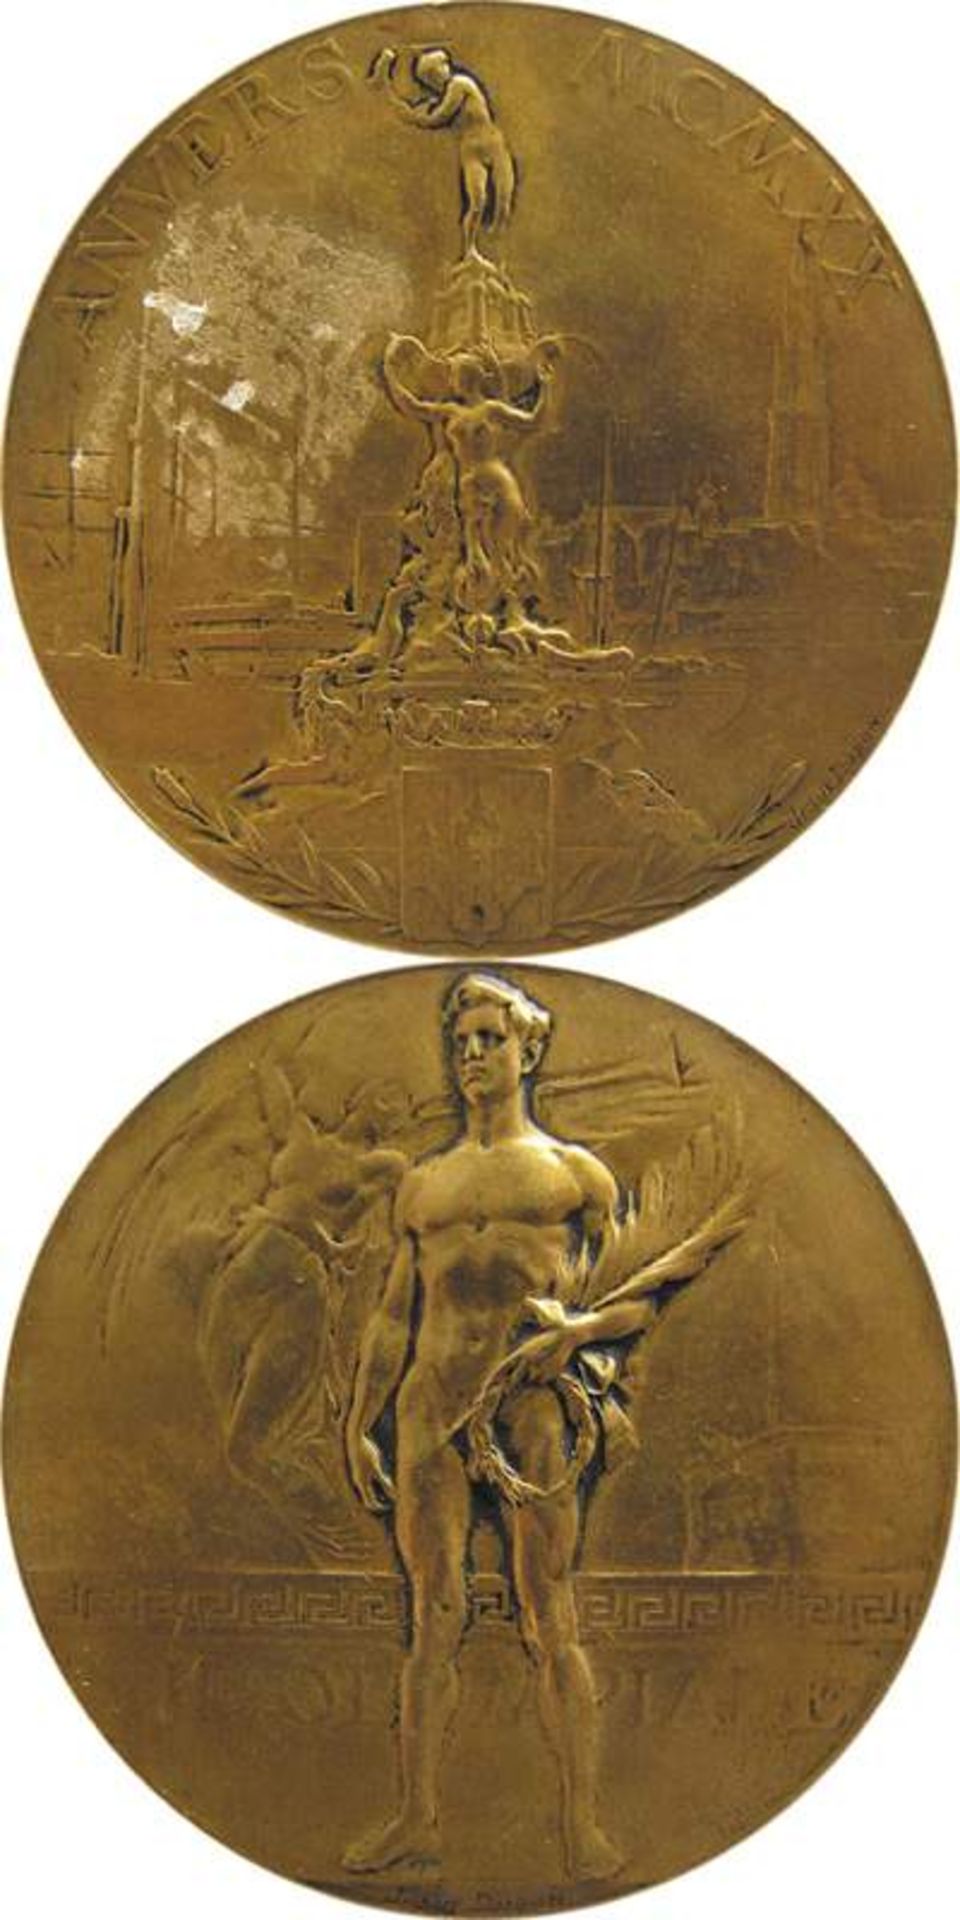 Winner´s medal: Olympic Games 1920  Antwerp - Bronze Medal. Original Third Place Medal for 7th